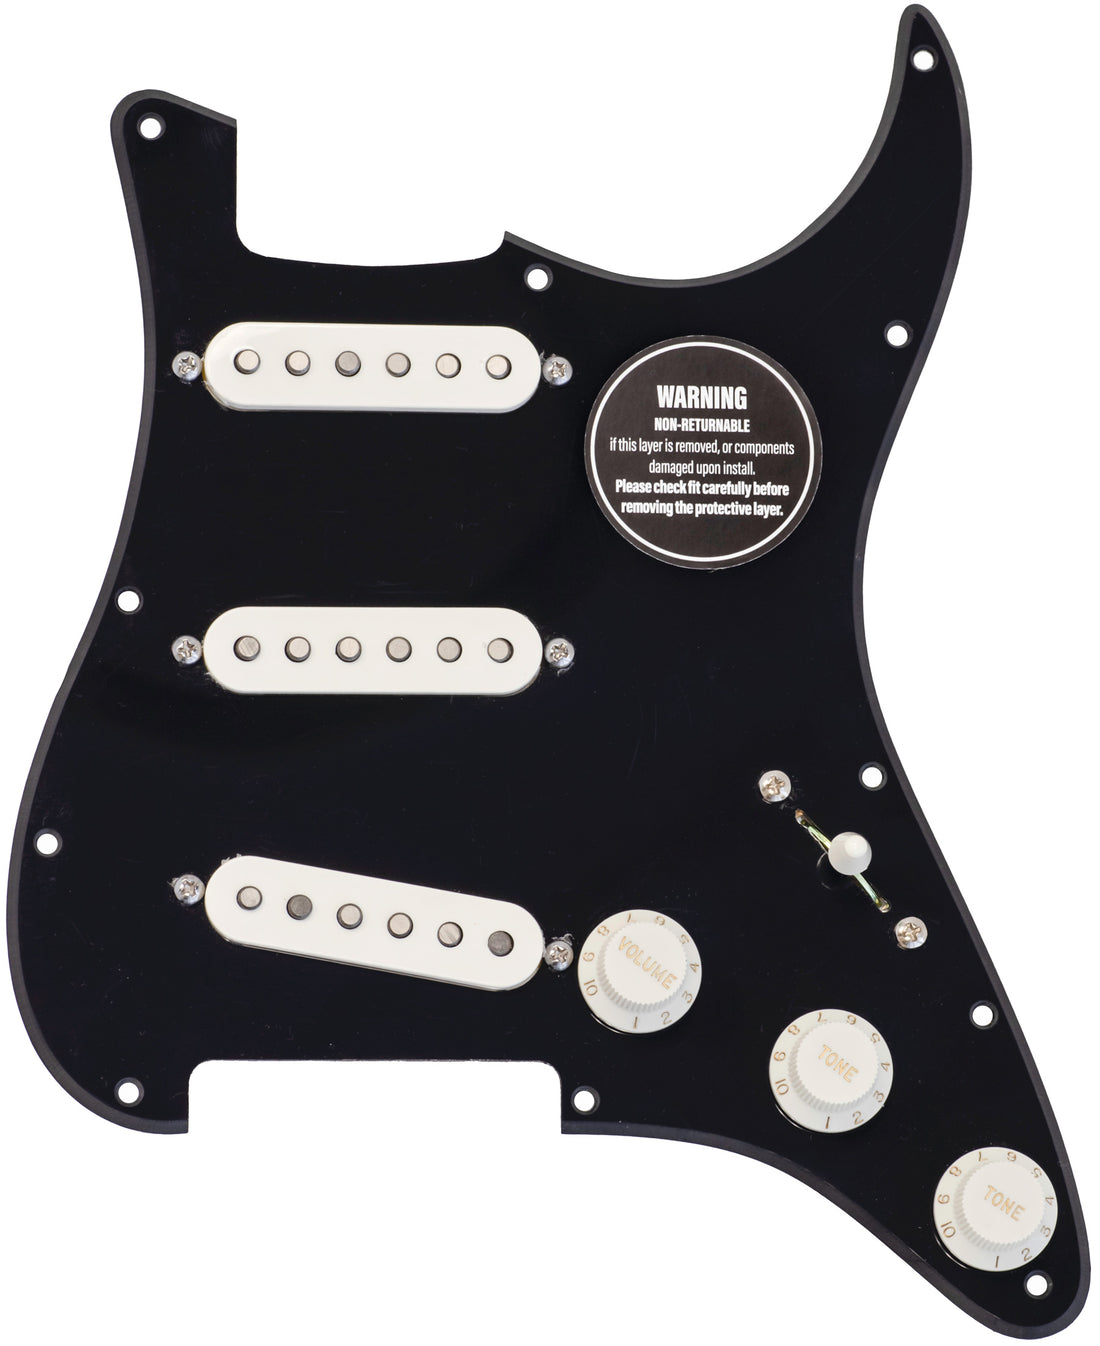 The ObsidianWire Gilmour loaded pickguard with 1 ply black pickguard and parchment white pickup covers and knobs